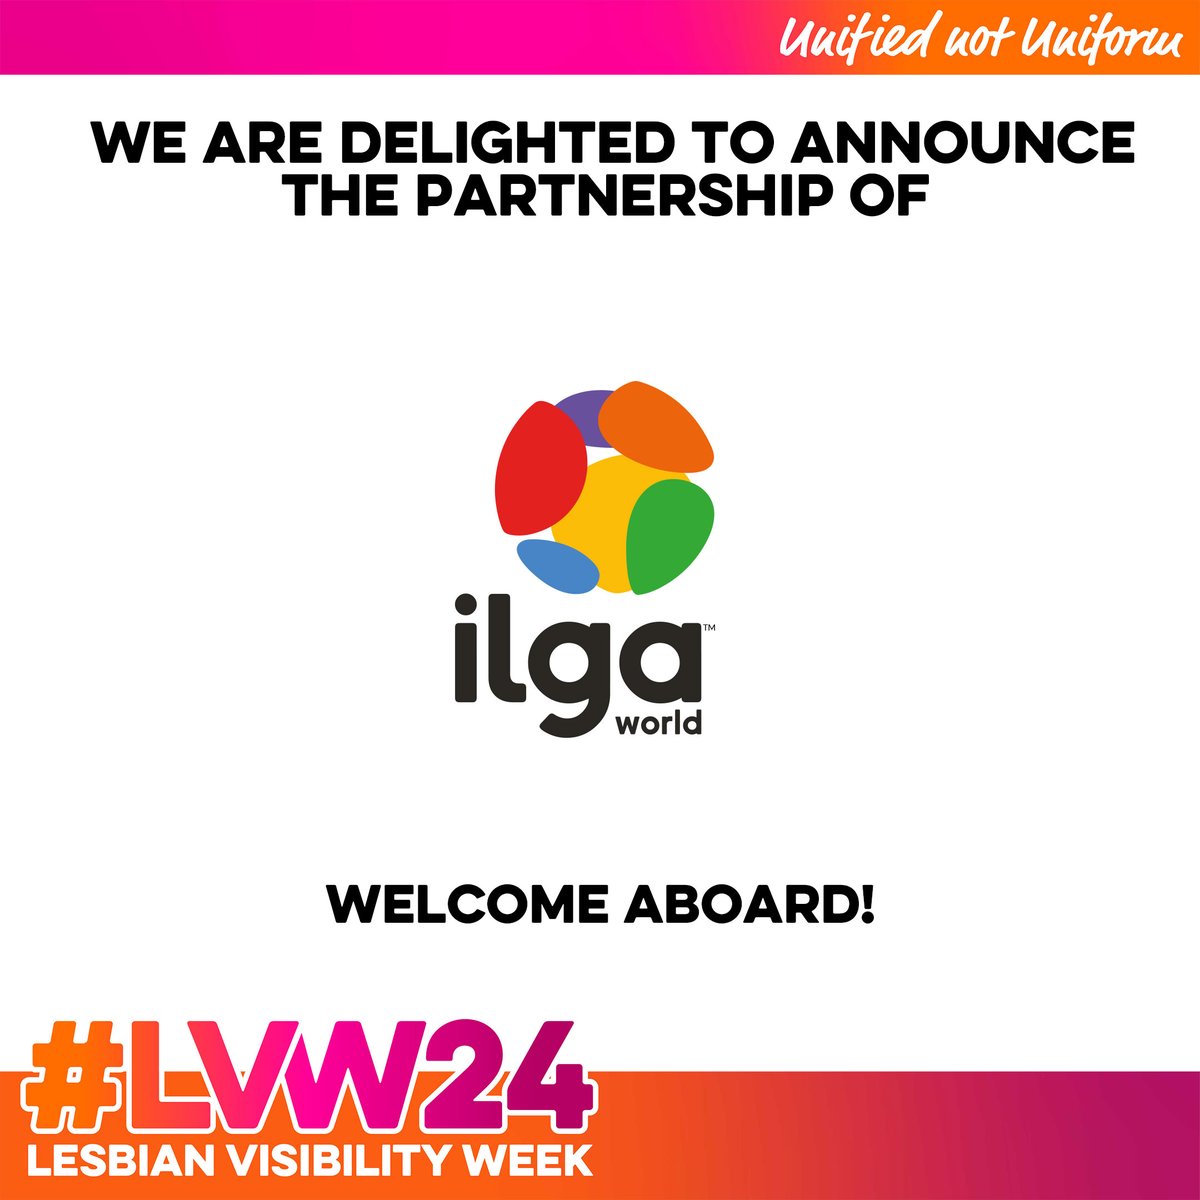 We cannot wait for #LVW24! The amazing @ILGAWORLD is one of our charity partners 🌈 Learn more about Lesbian Visibility Week: lesbianvisibilityweek.com